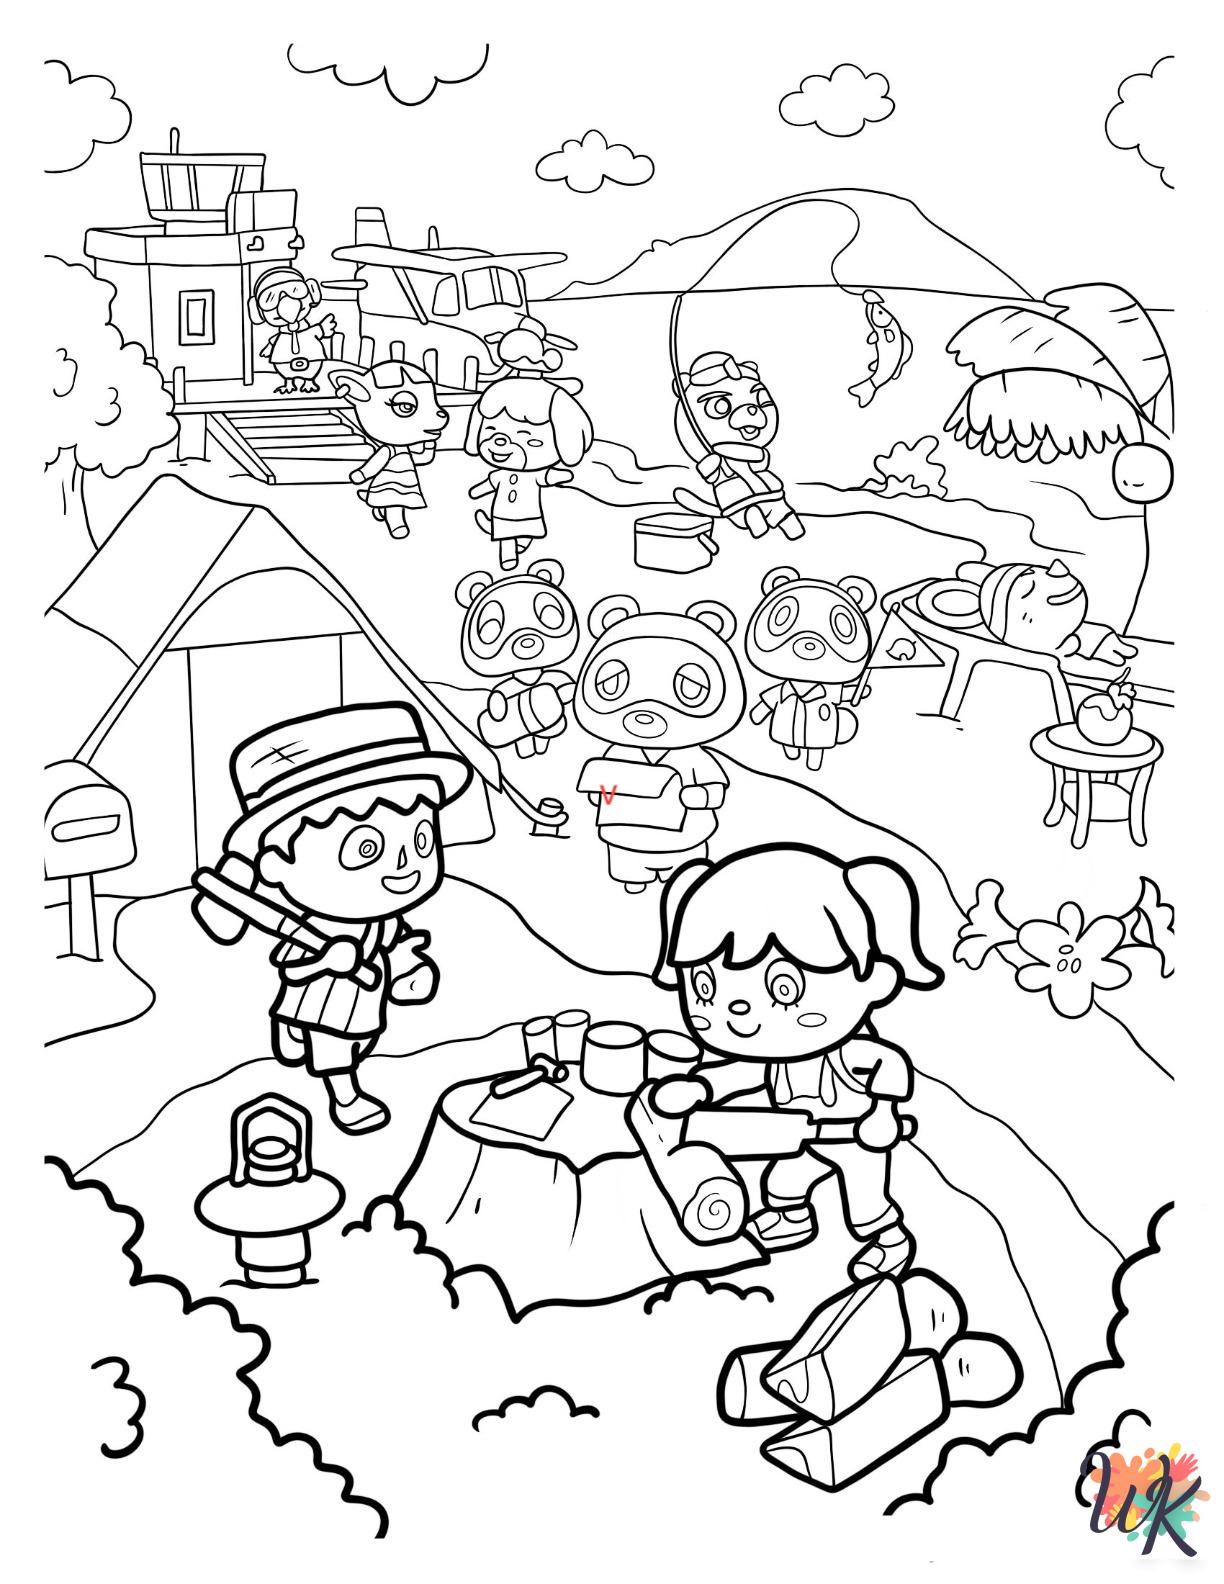 Animal Crossing coloring pages for adults pdf